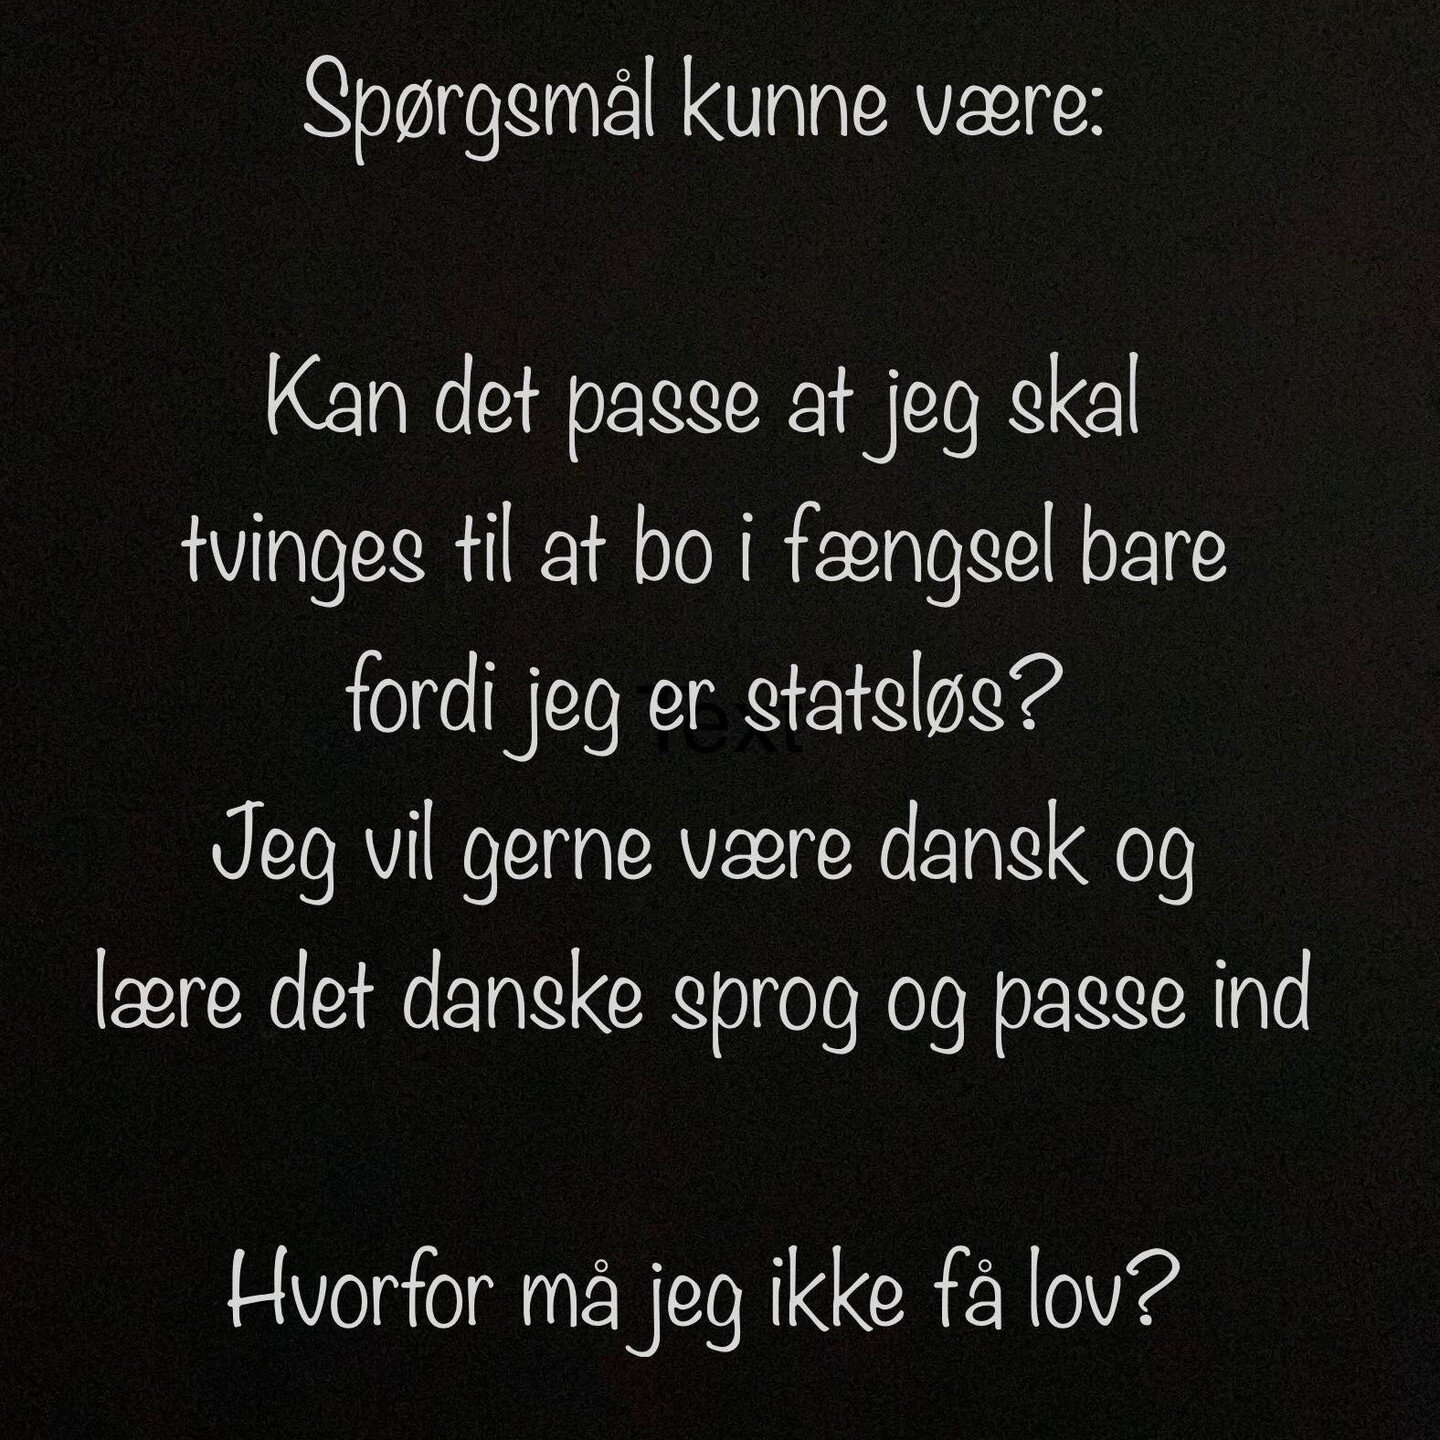 Hawar Azizi wrote this poem on his wall while living in Sj&aelig;lsmark deportation camp in 2019. Now he is living in a different deportation camp, still stateless and paperless